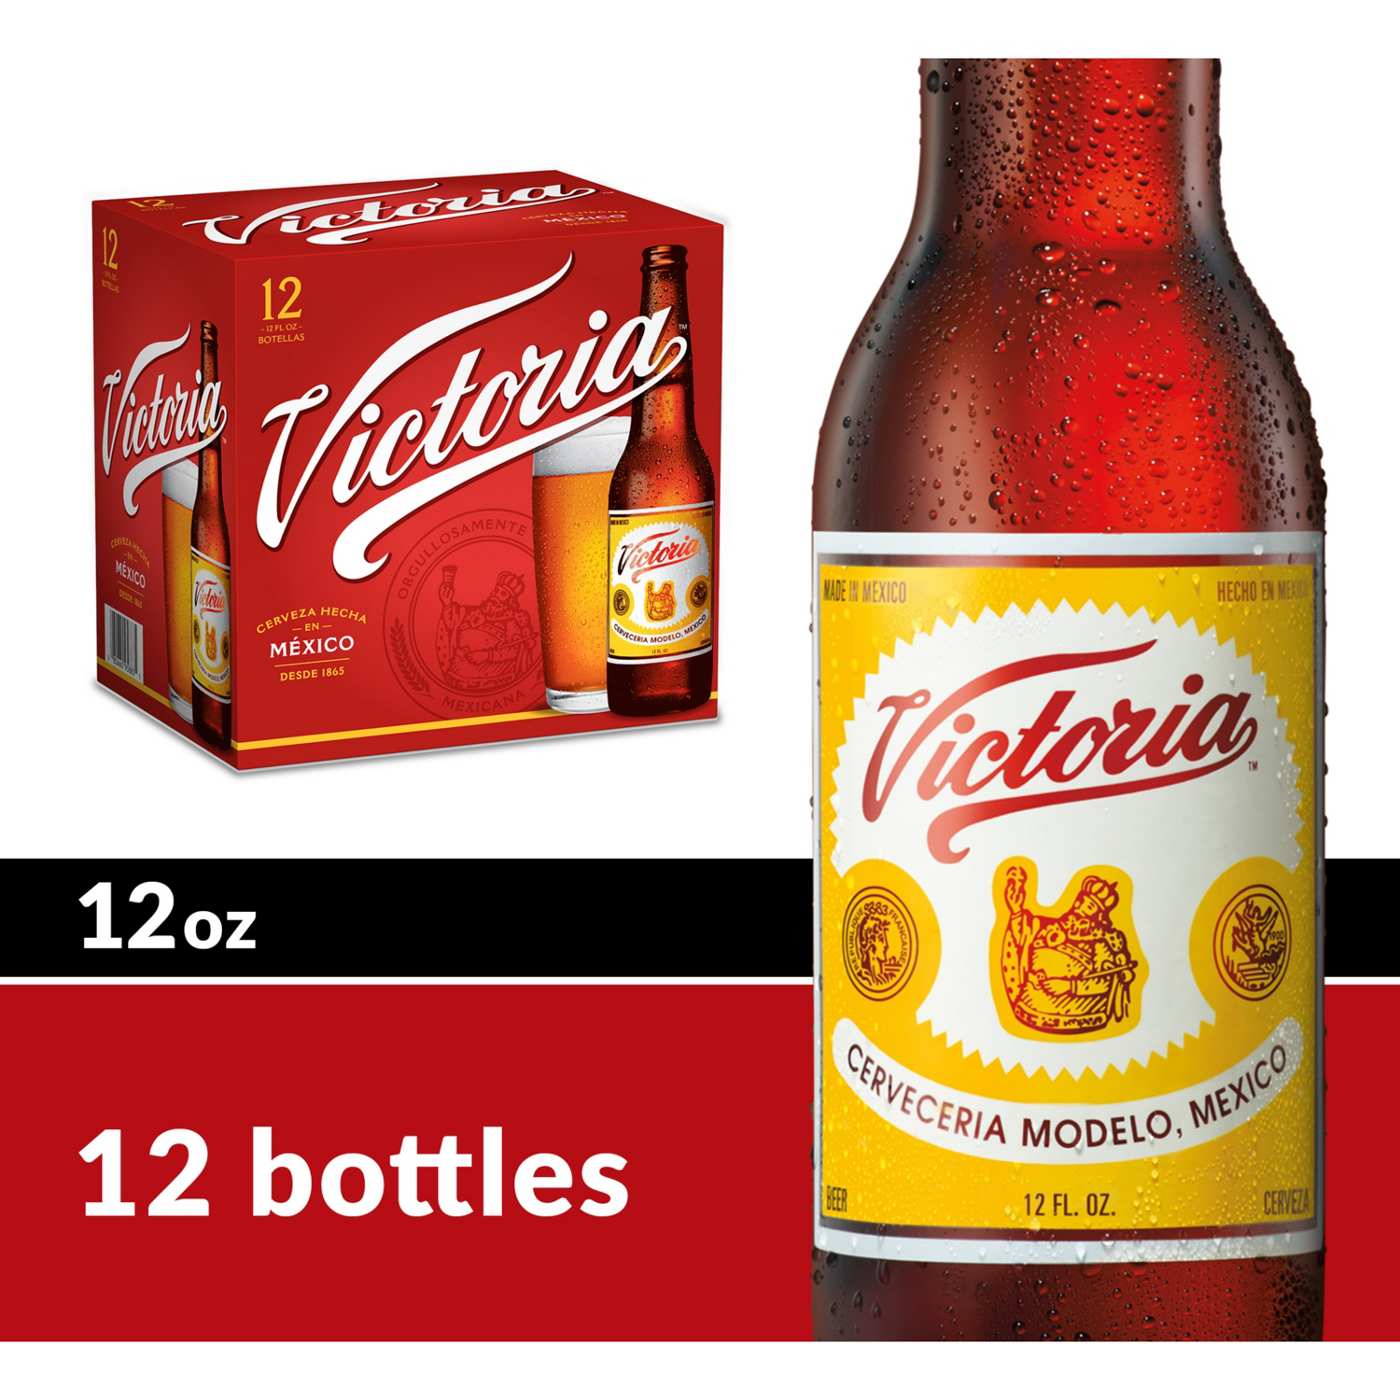 Victoria Amber Lager Mexican Beer 12 oz Bottles, 12 pk; image 1 of 6